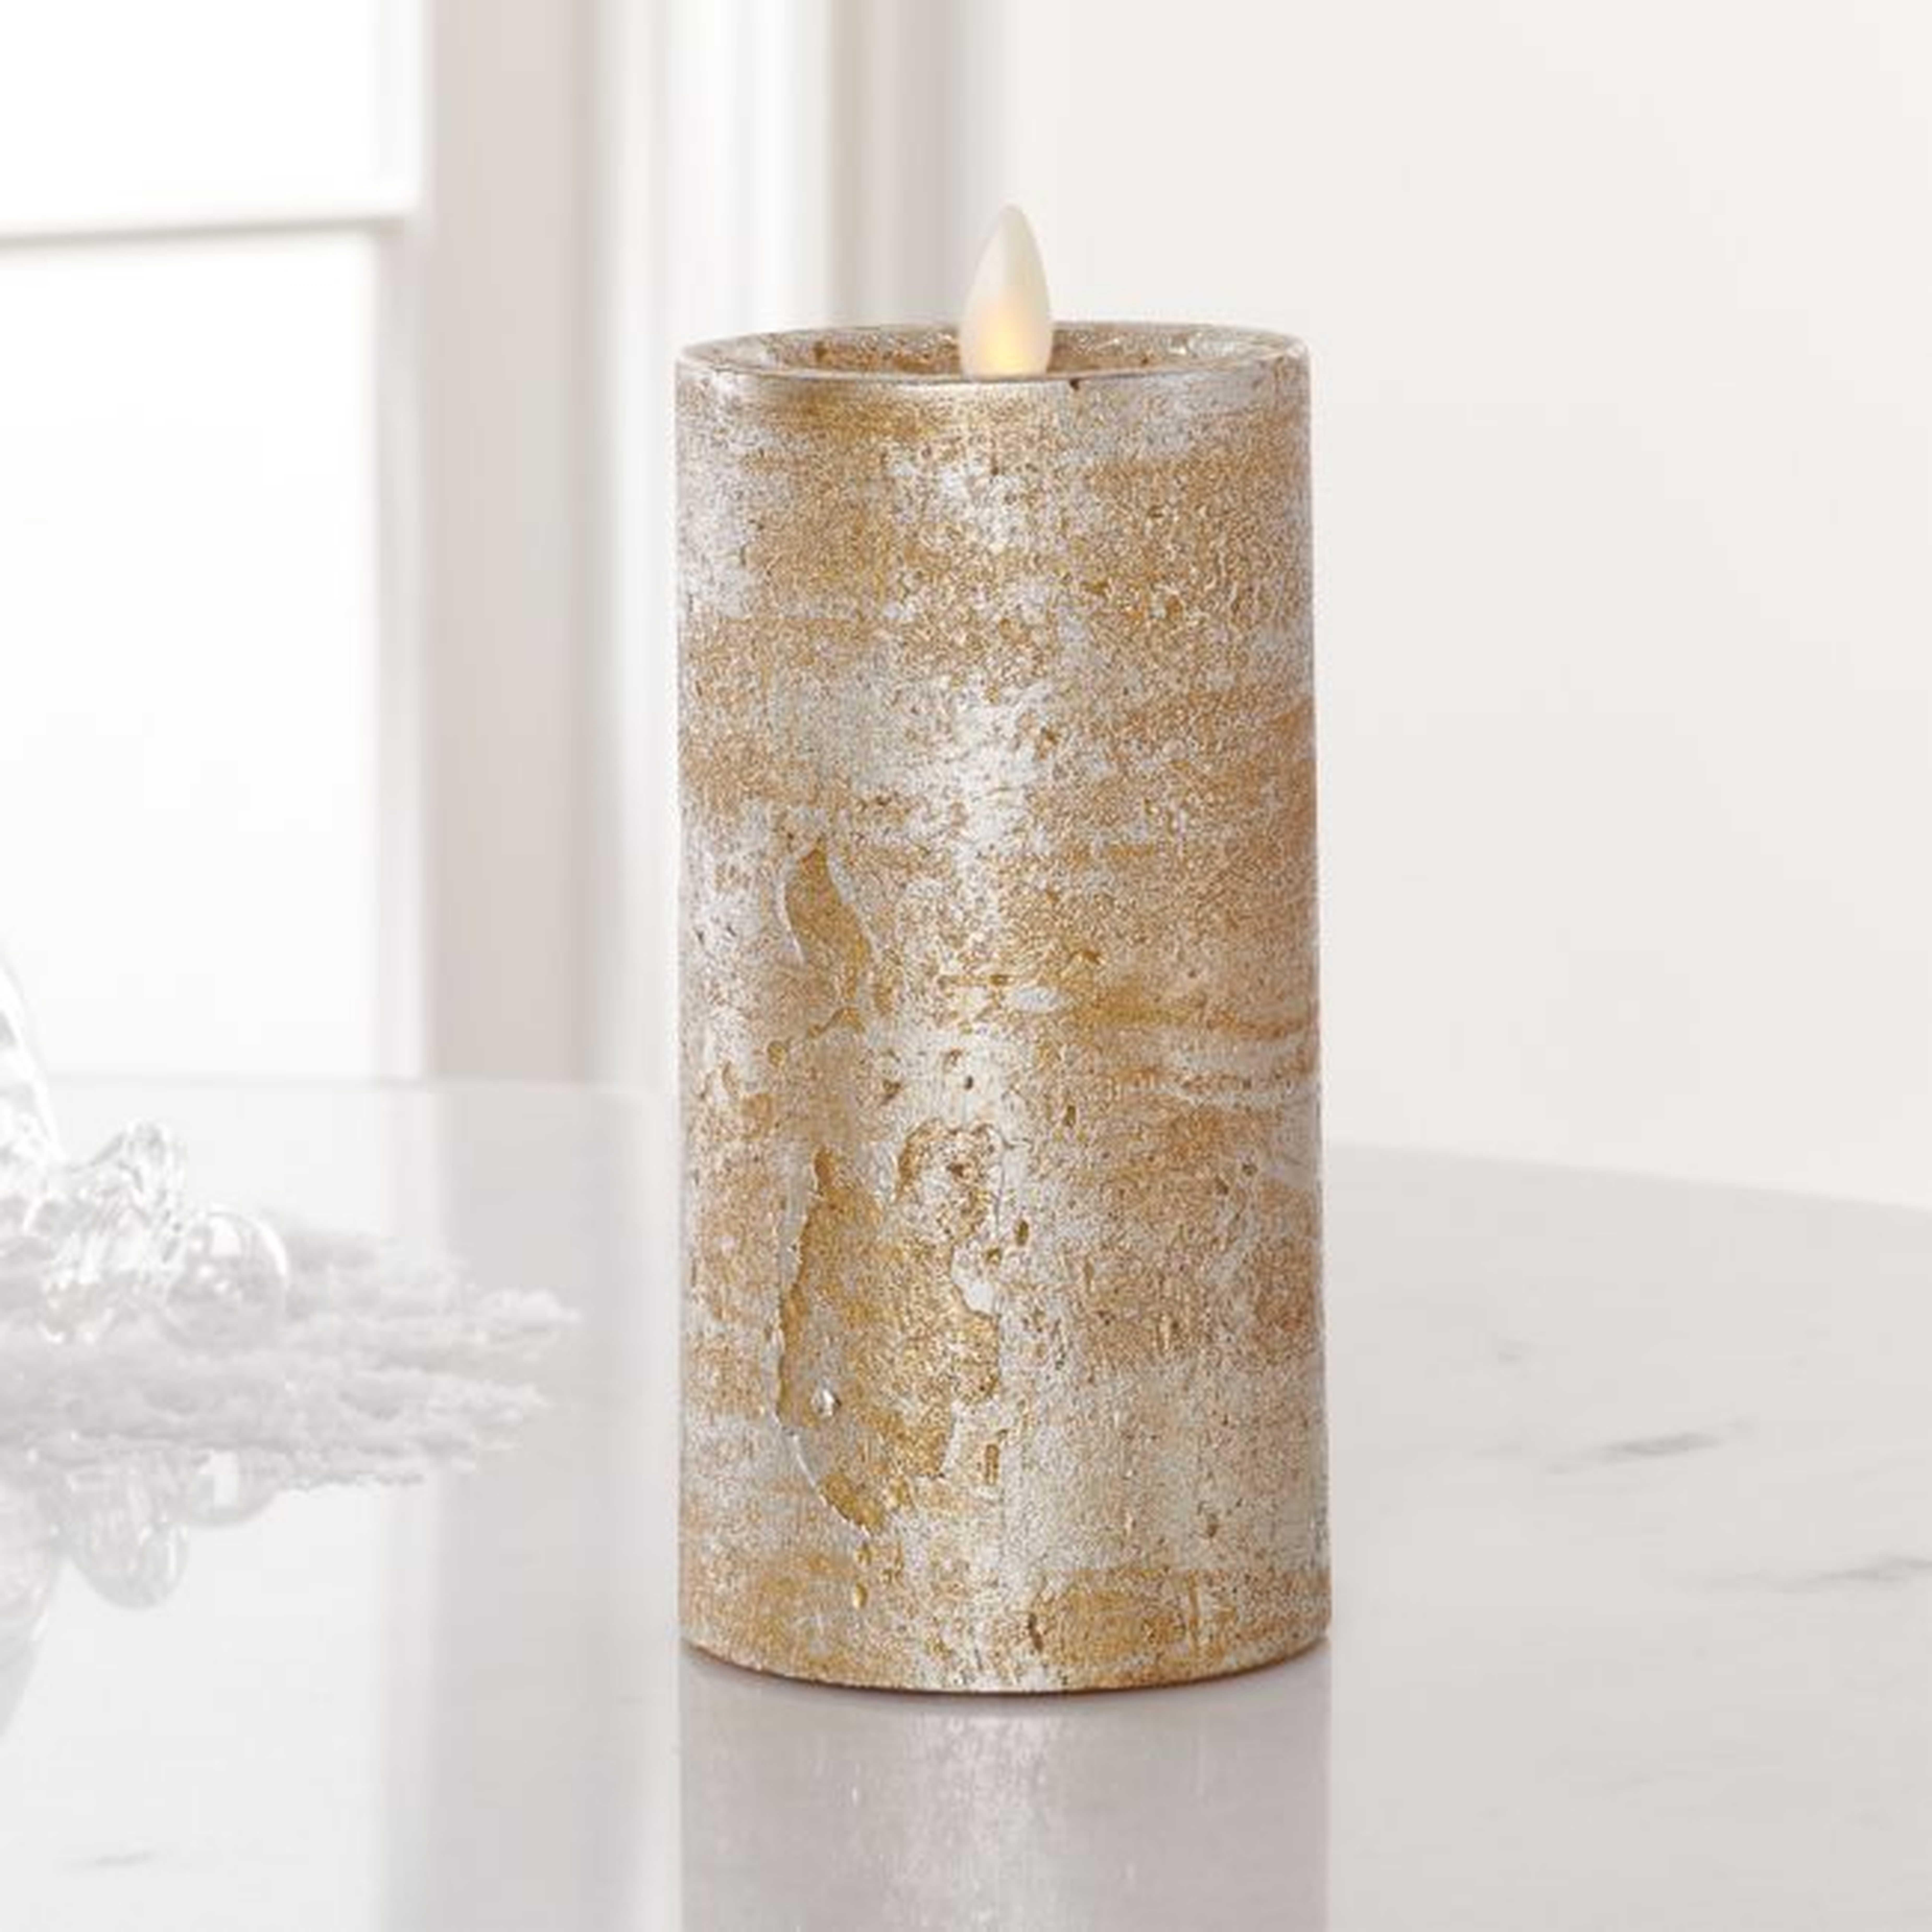 Flicker Champagne 3"x6" Flameless Pillar Candle - Crate and Barrel